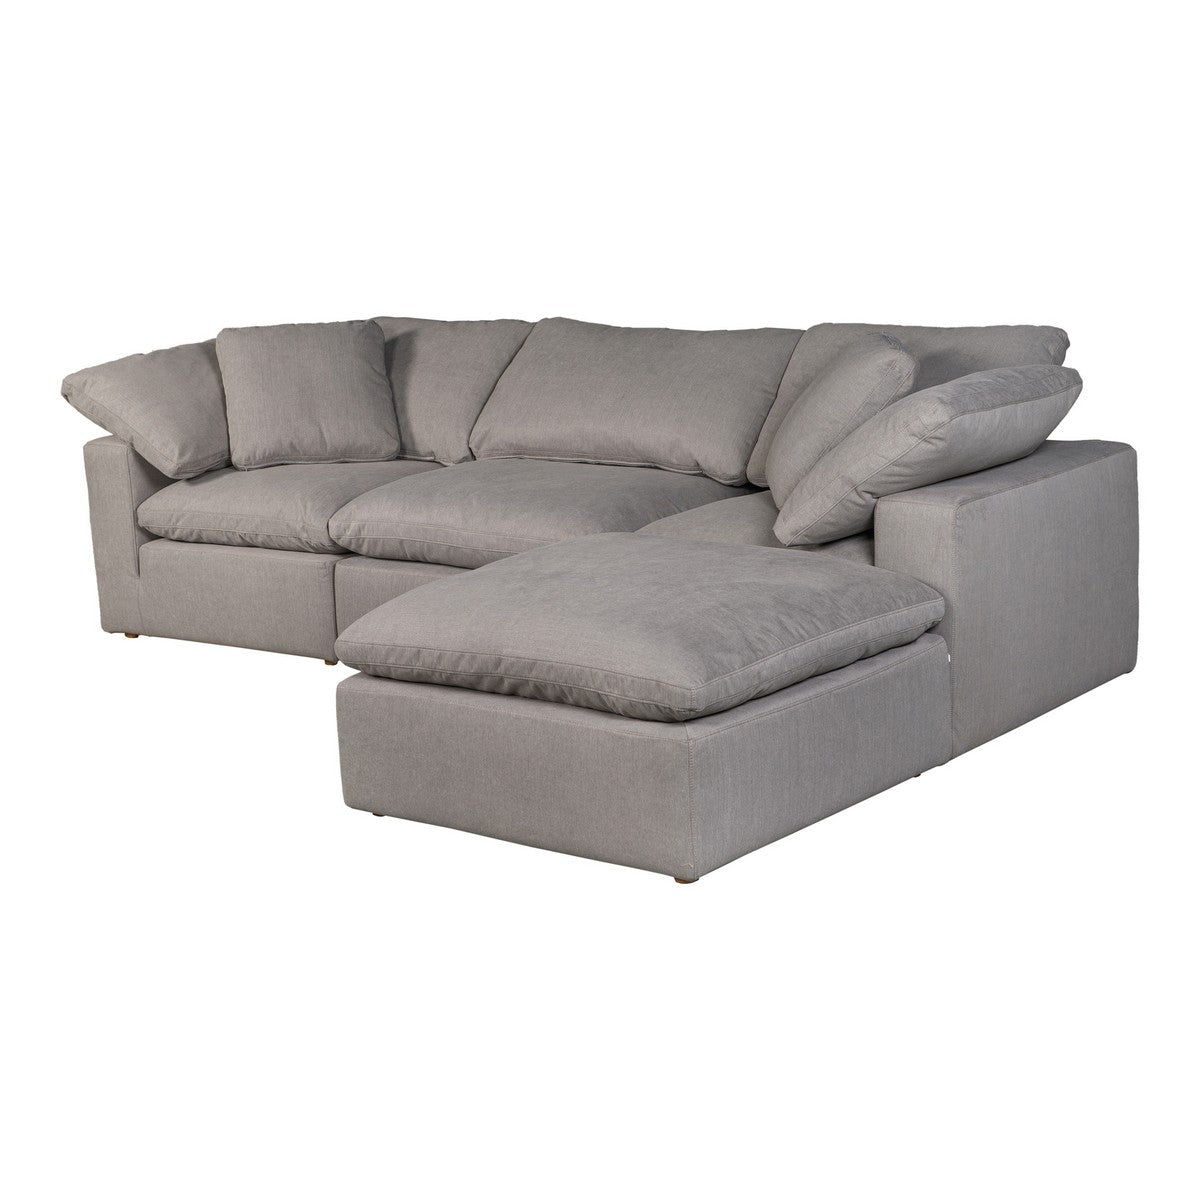 Moe's Home Collection Clay Lounge Modular Sectional Livesmart Fabric Light Grey - YJ-1008-29